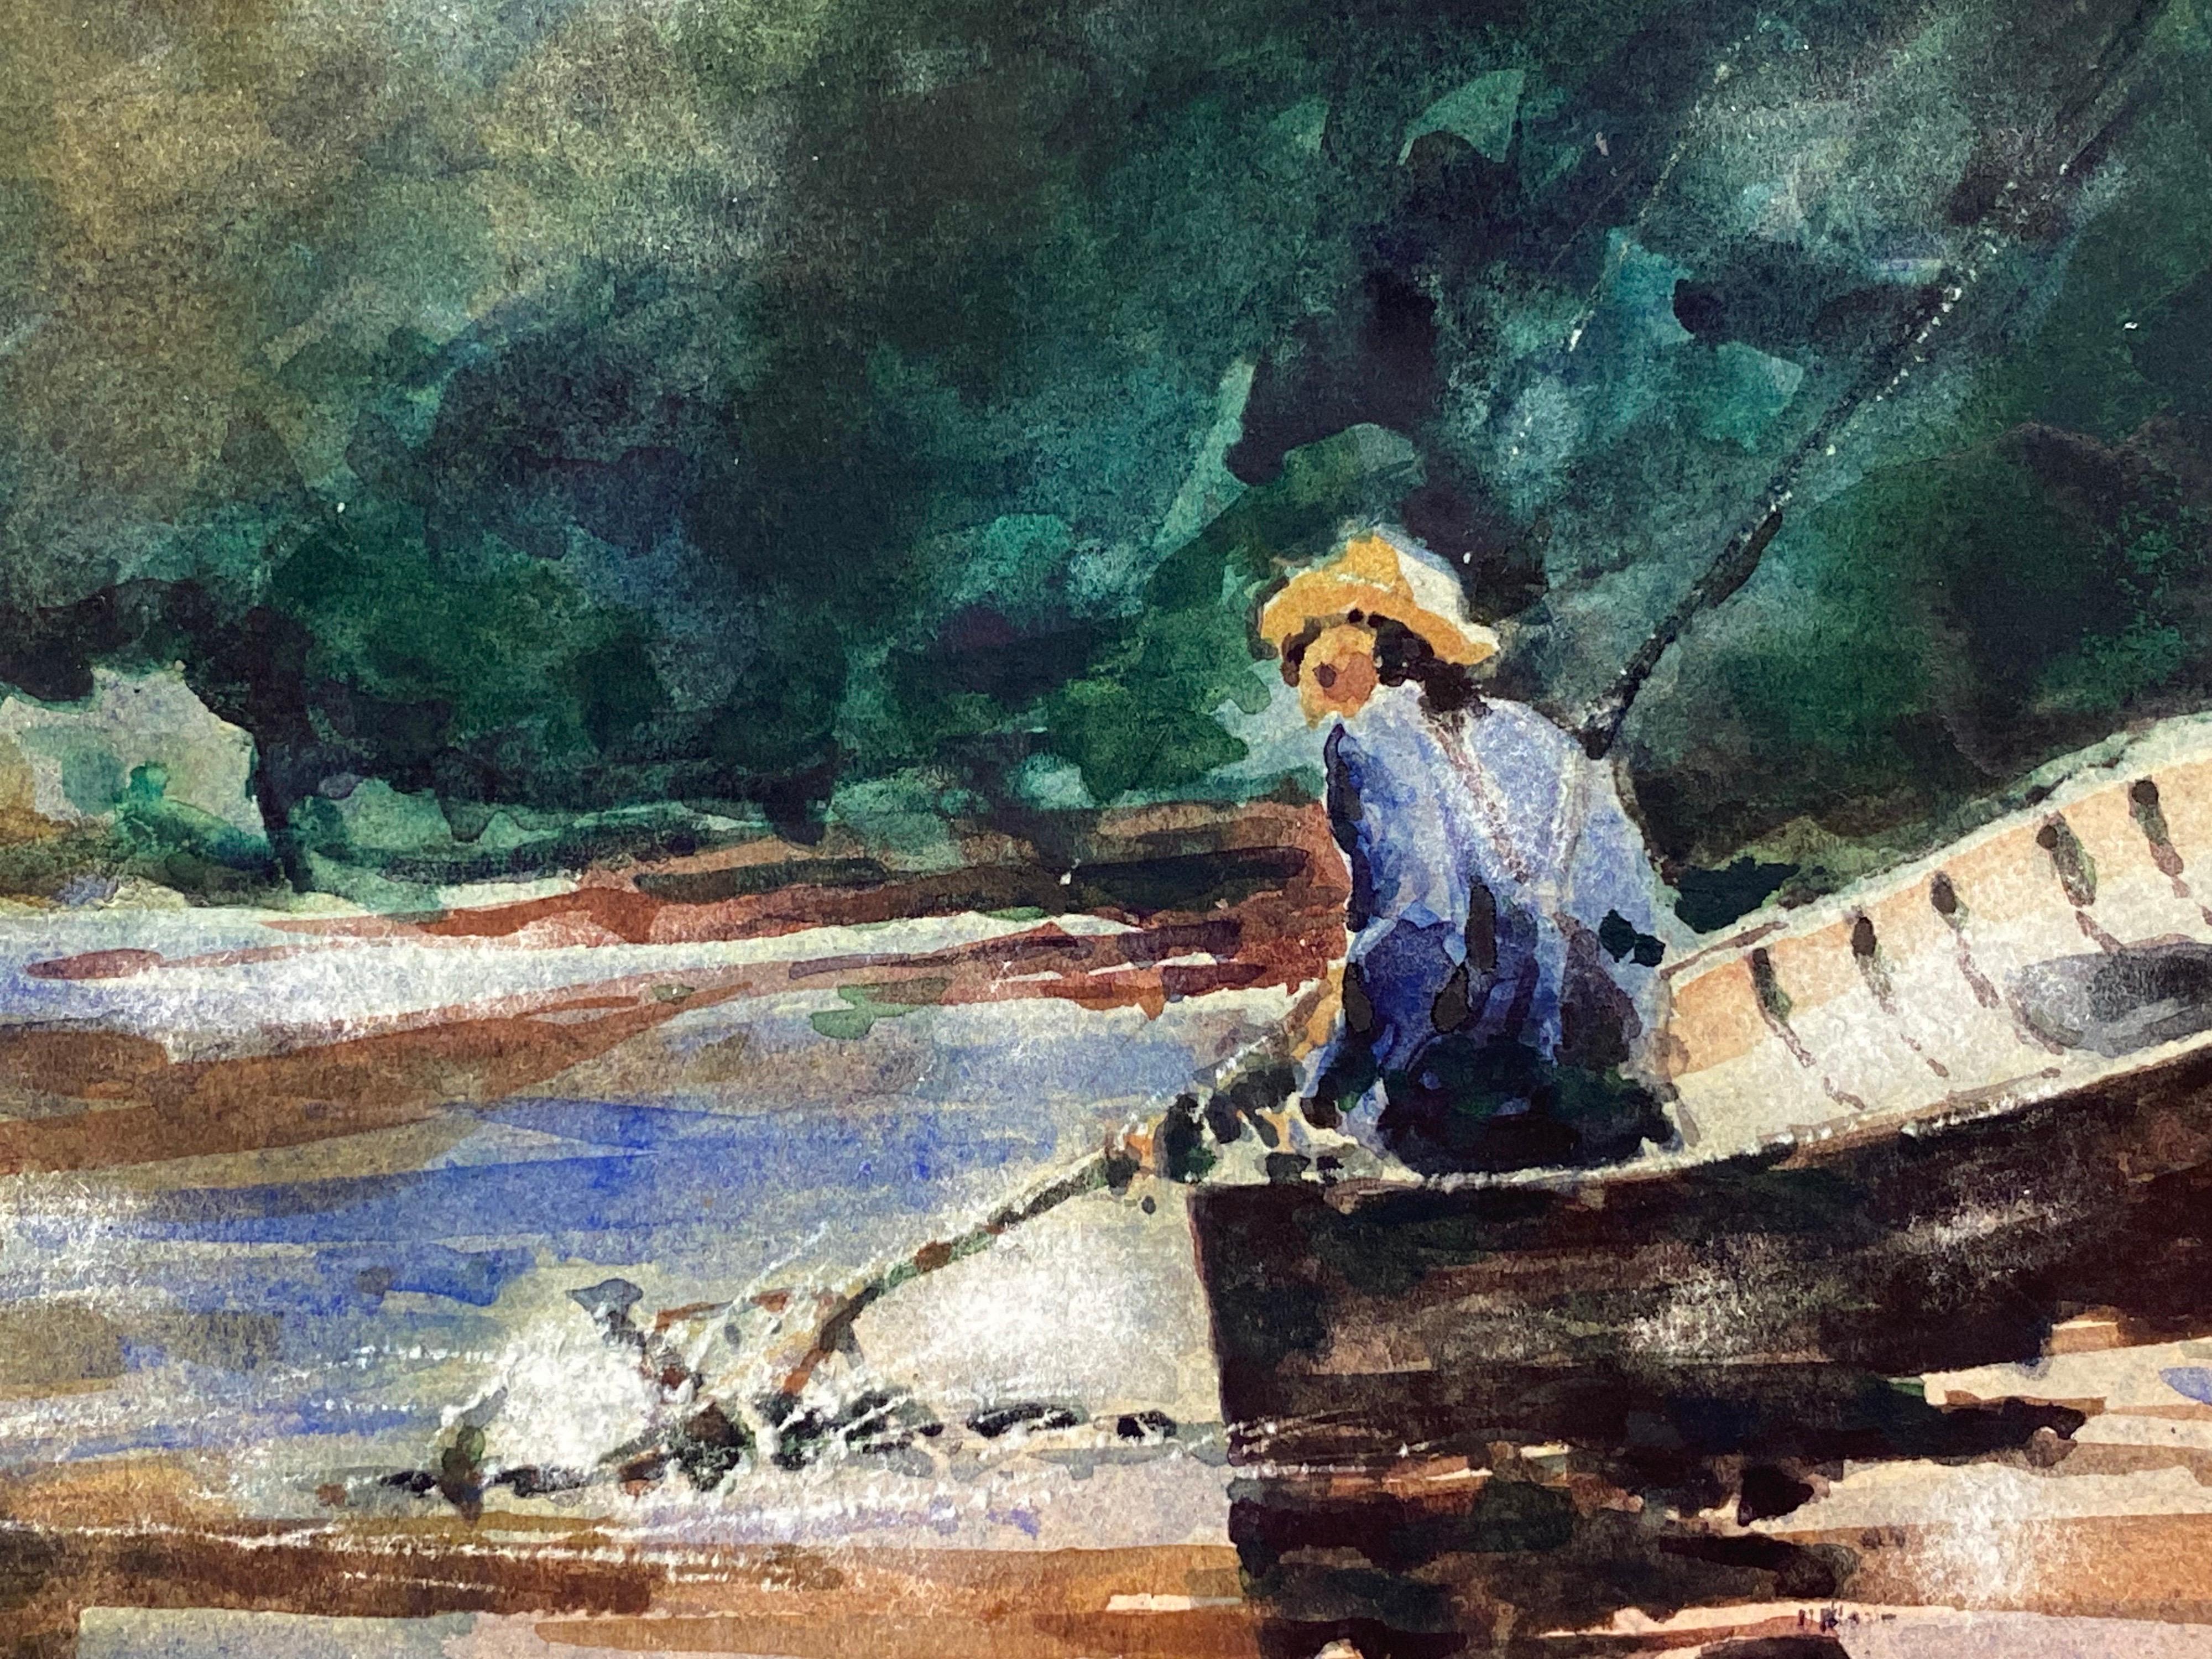 ANGLER IN BOAT - MAURICE MAZEILIE - FRENCH IMPRESSIONIST WATERCOLOUR - Black Landscape Painting by Maurice Mazeilie